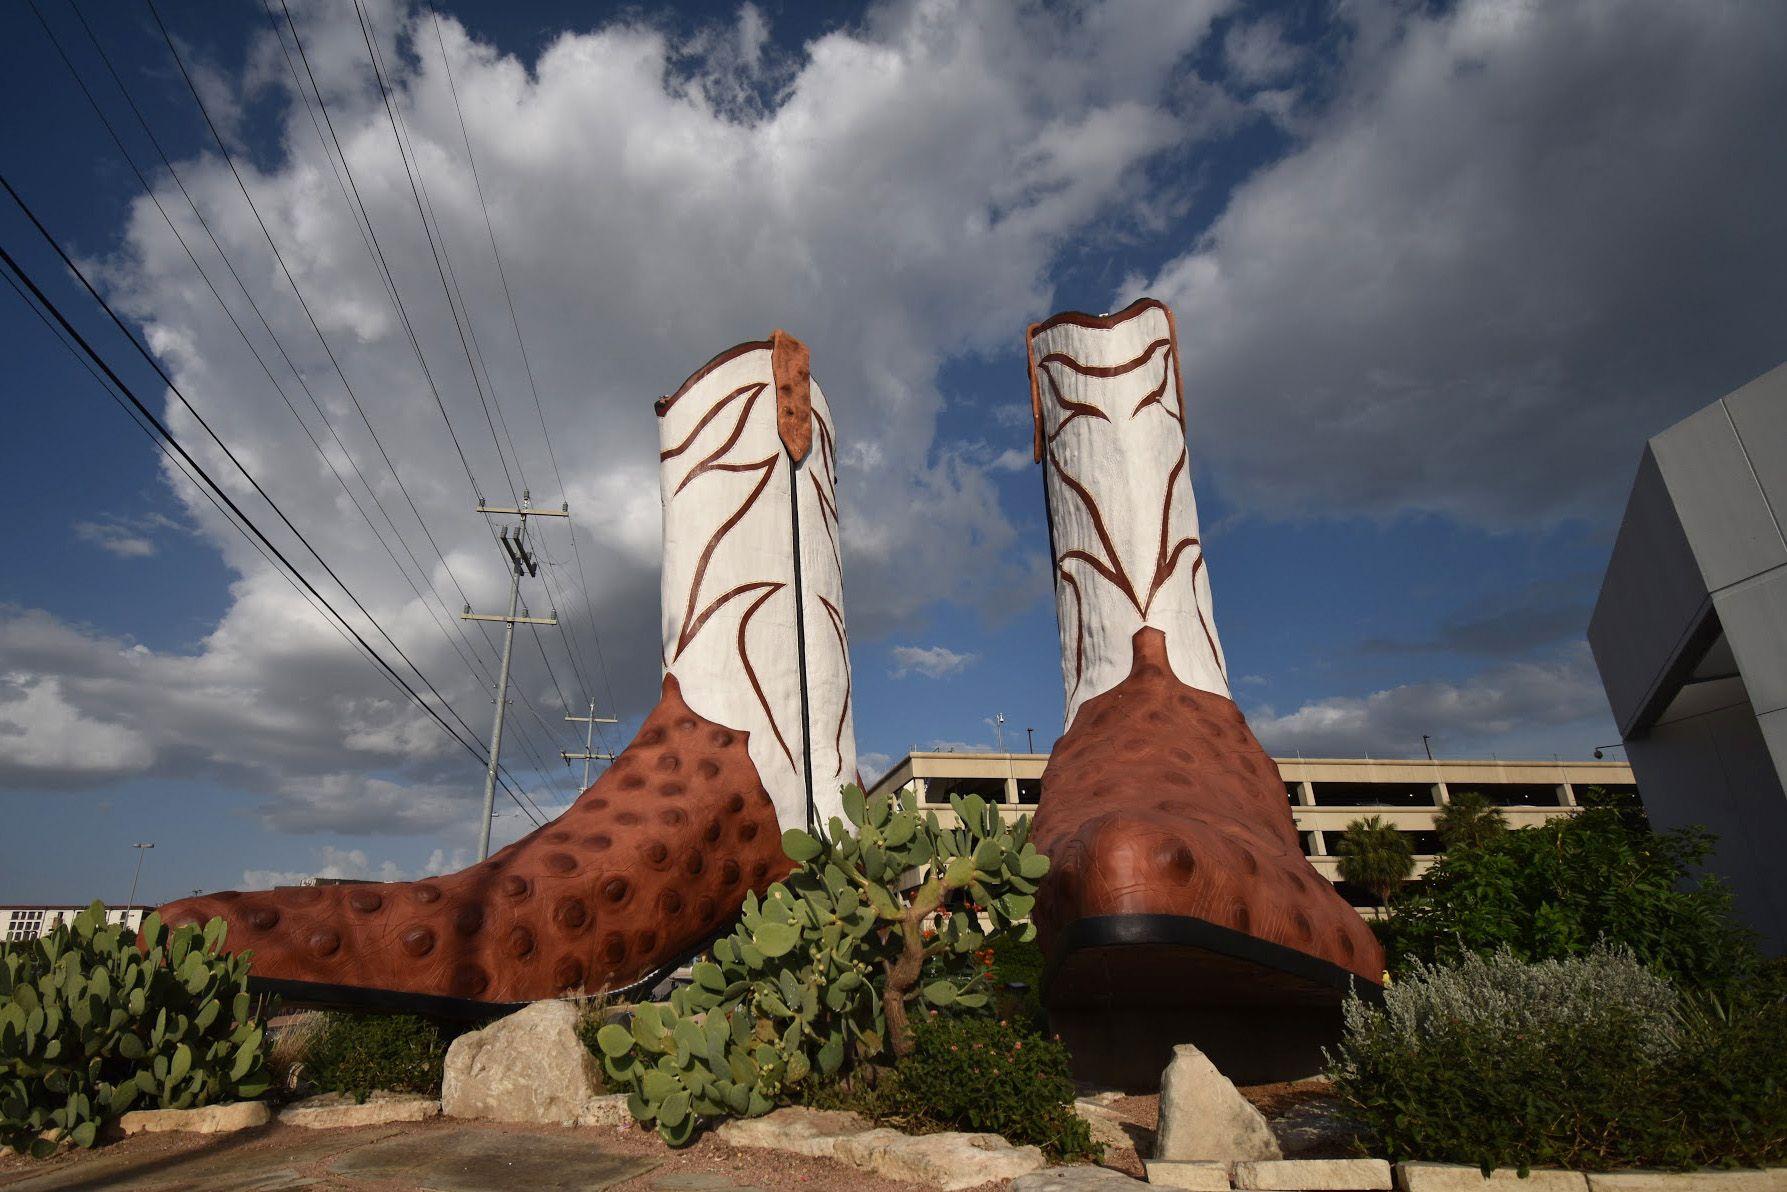 Looking up at two gigantic white and brown cowboy boots. There is a parking garage in the background.